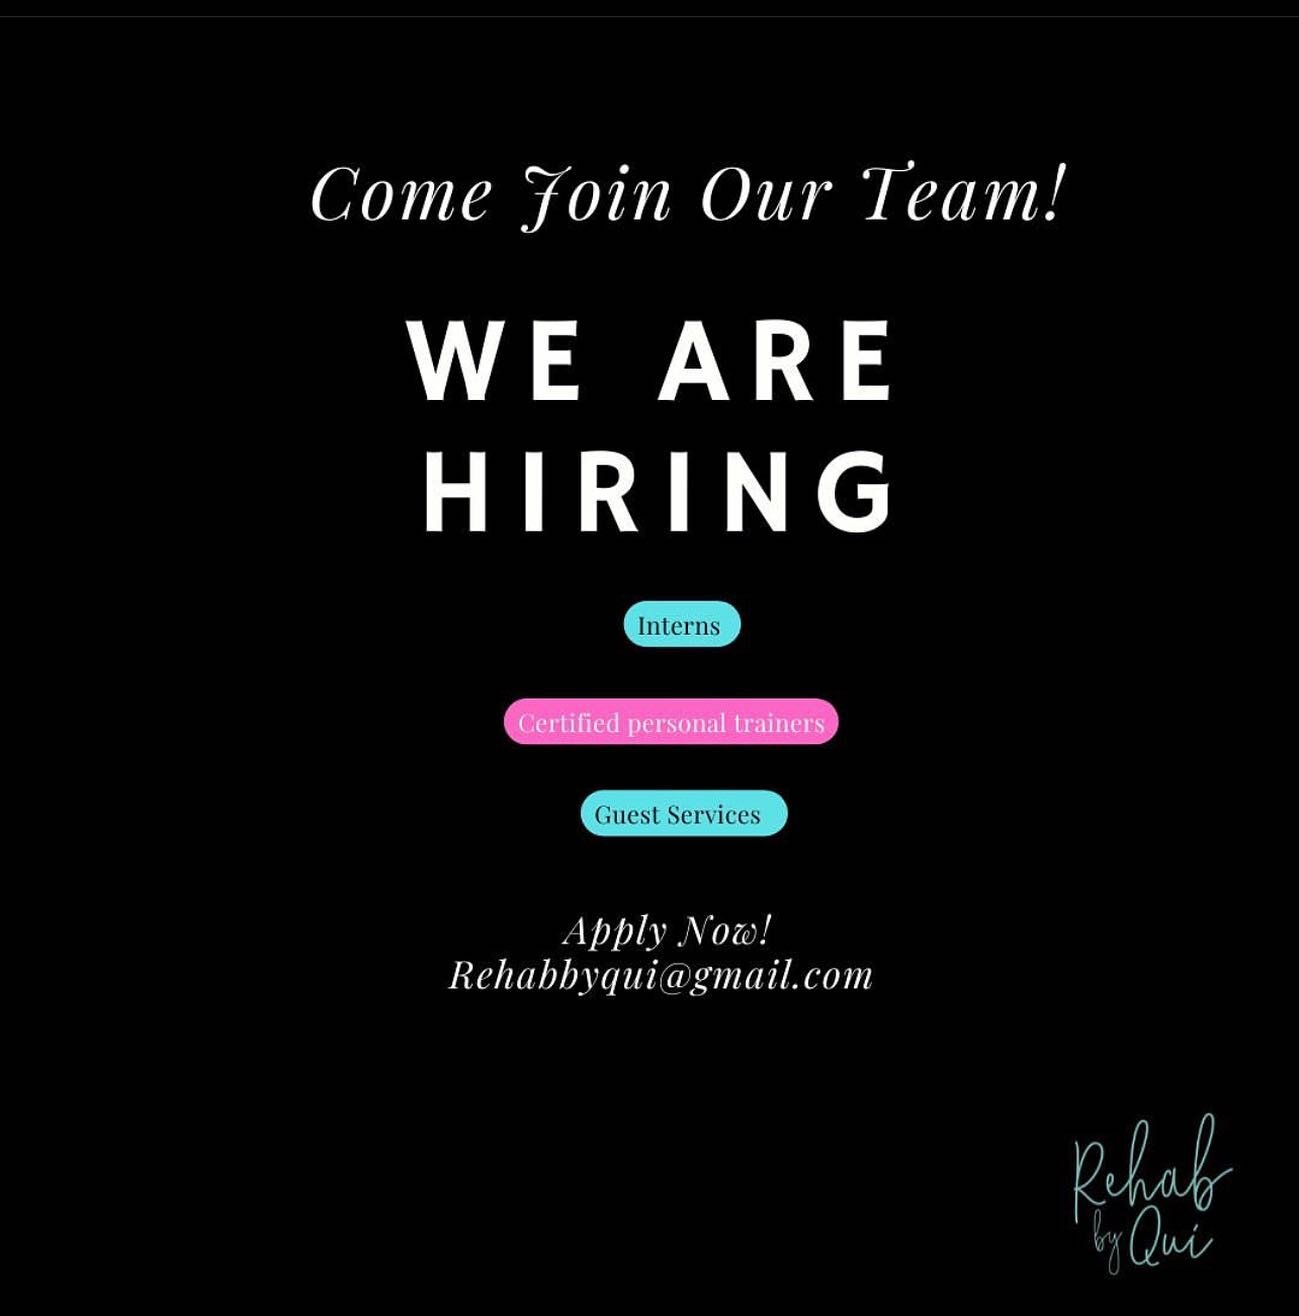 Are you a personal, small group, or fitness instructor looking for a family based private training facility? Join Rehab fam now! Send your resume to rehabbyqui@gmail.com ❤️

Serious inquiries only! 🫶